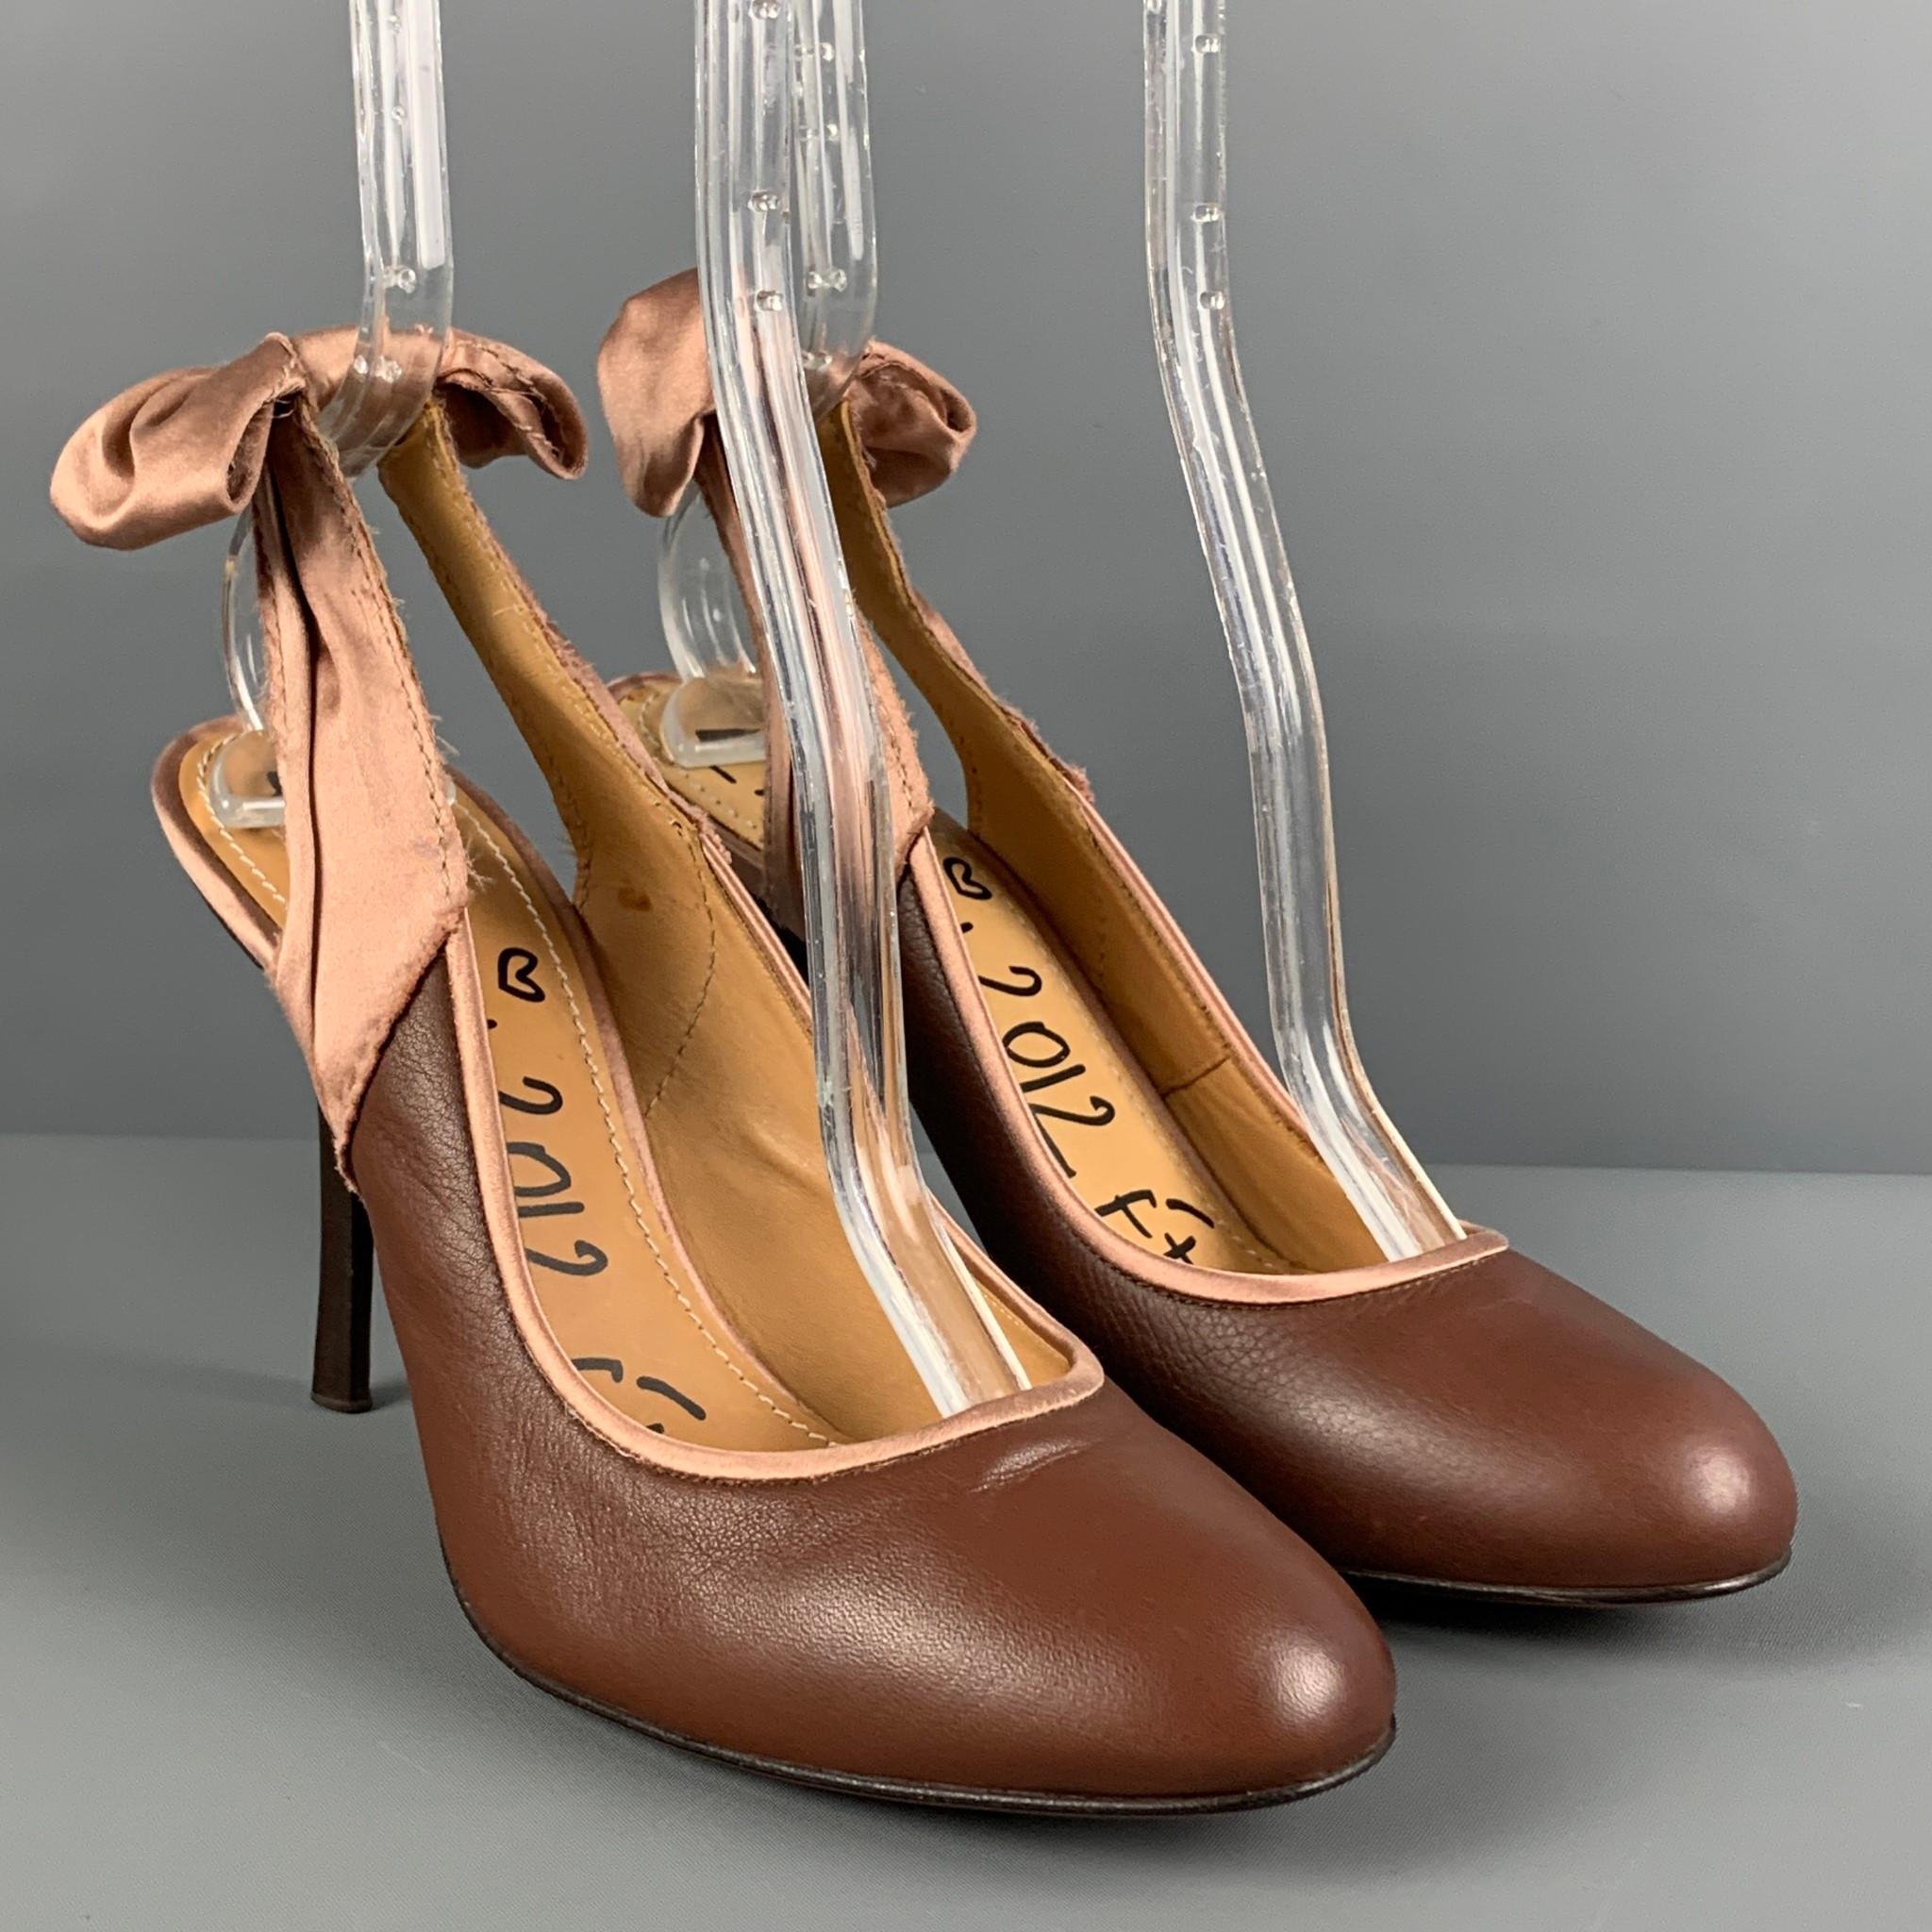 LANVIN pumps comes in a brown leather with a pink satin trim featuring a slingback style, bow detail, and a stiletto heel. 

Very Good Pre-Owned Condition.
Marked: 39

Measurements:

Heel: 3.75 in. 